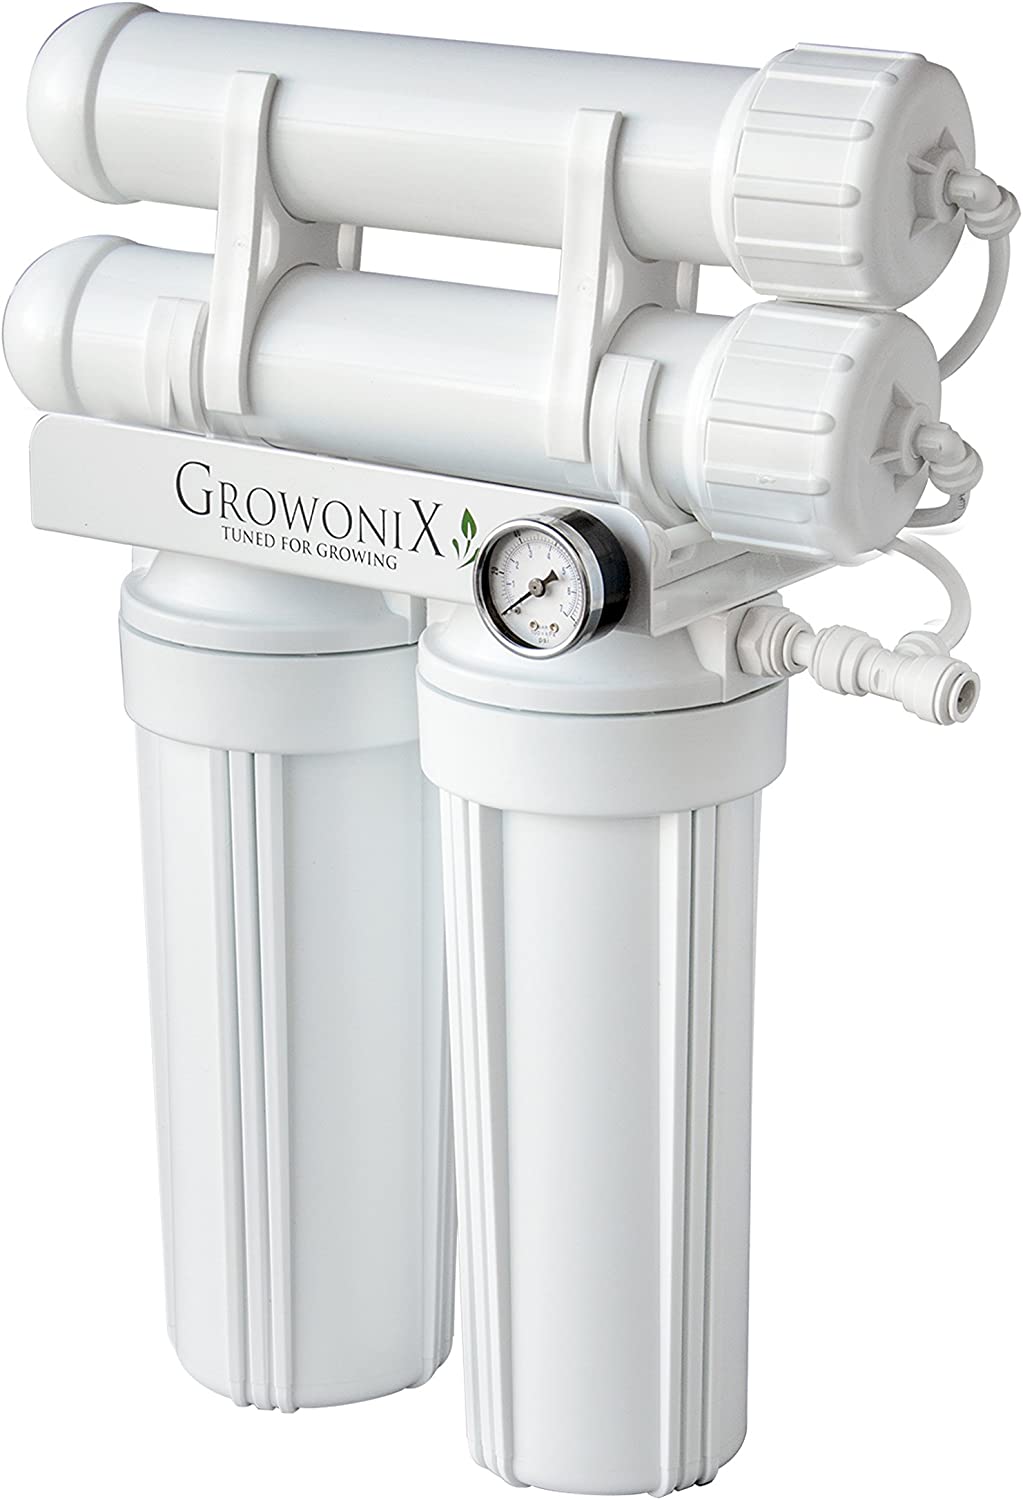 GROWONIX EX400 Reverse Osmosis System Ultra High Flow Rate Water Purification Filter for Hydroponics Gardening Growing Drinking H20 Coffee Point of use On Demand Purifier Most Efficient Eco Water